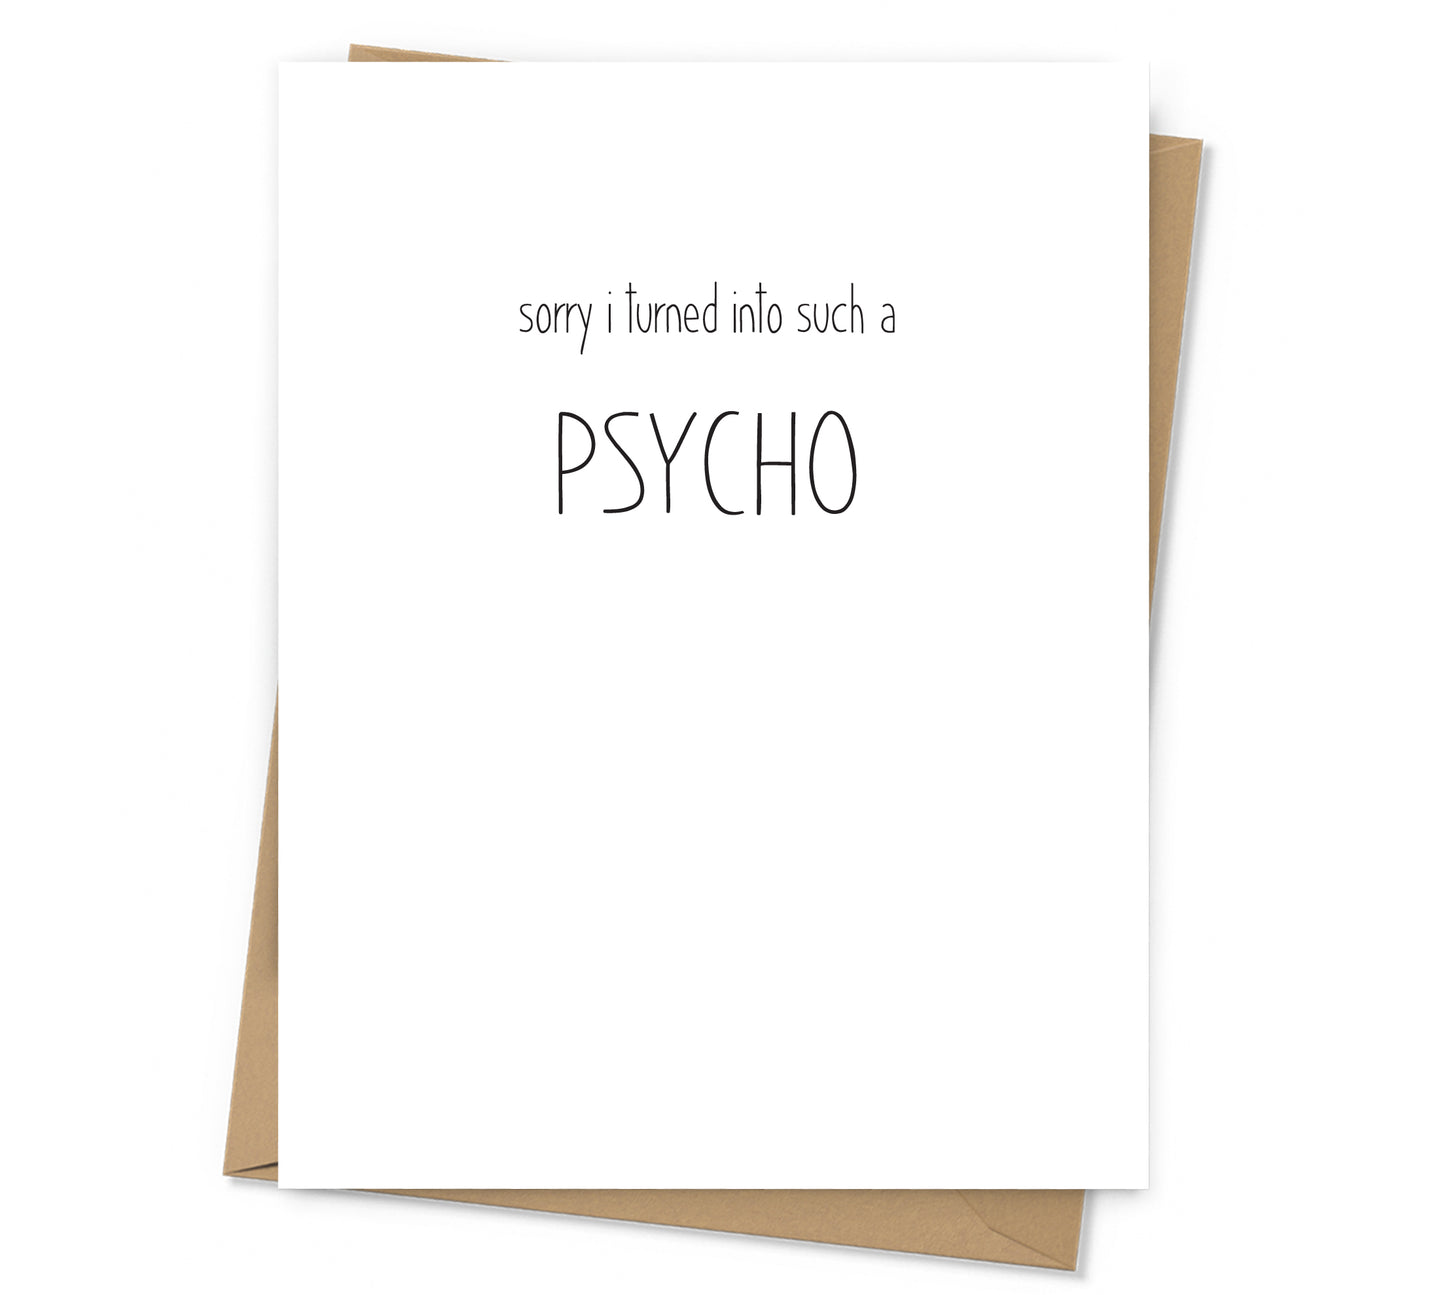 Such a Psycho Apology Card